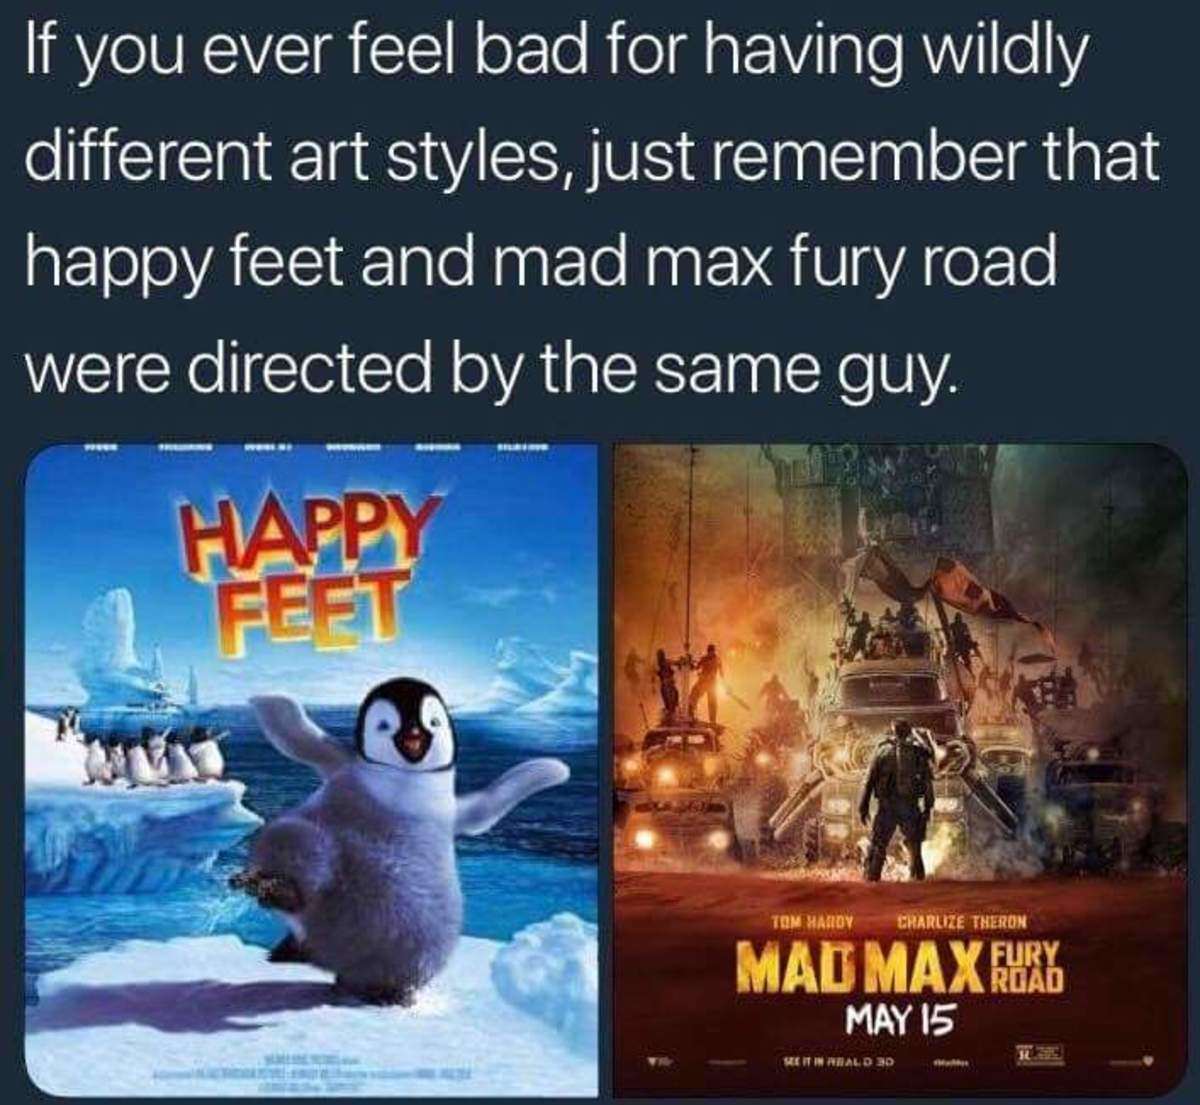 fun fact that Mad Max Fury Road was directed by same person who directed Happy Feet